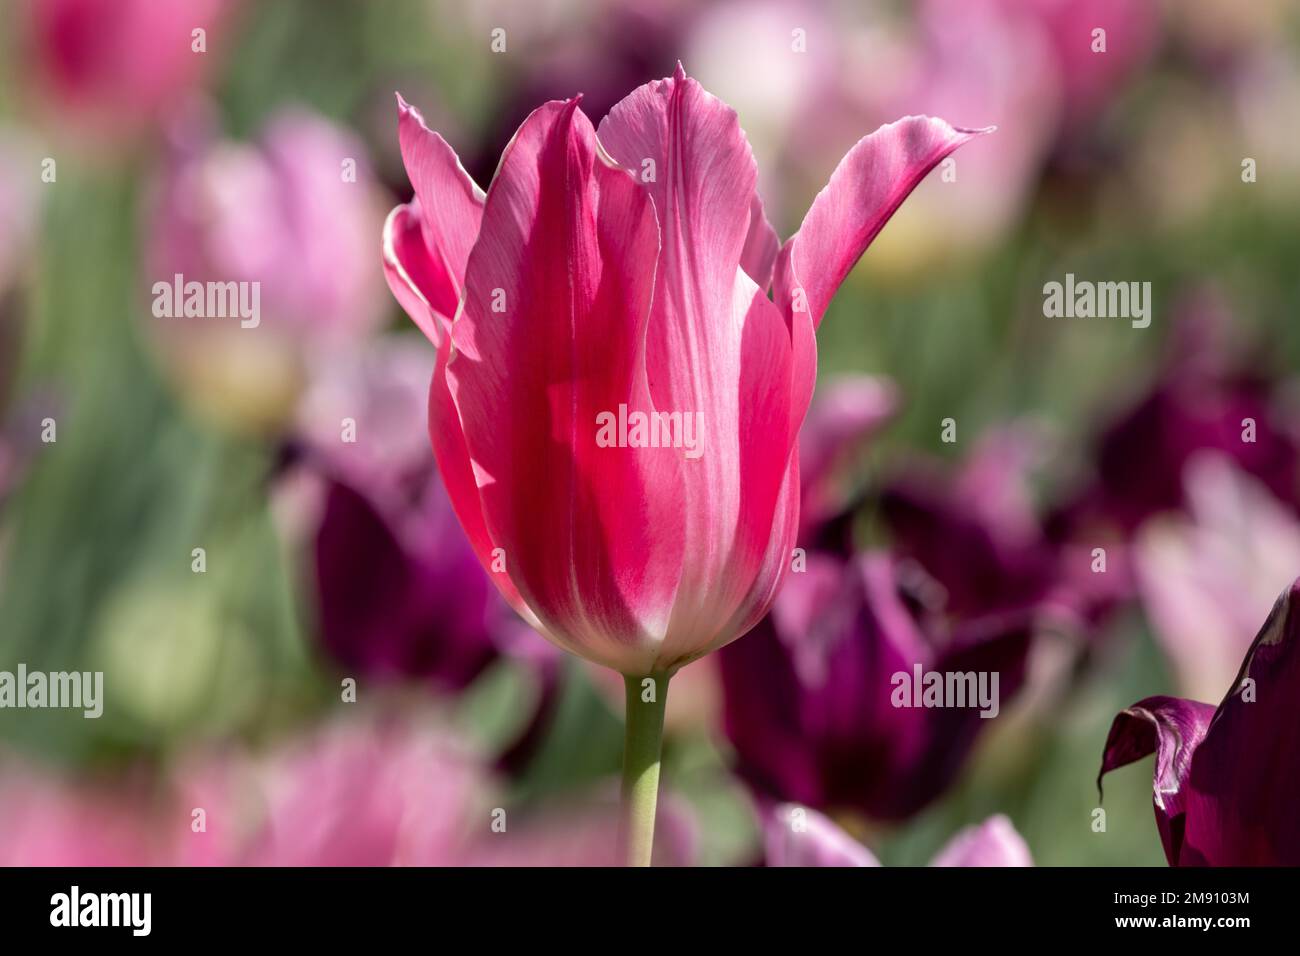 A vibrant, neon pink tulip in spring Stock Photo